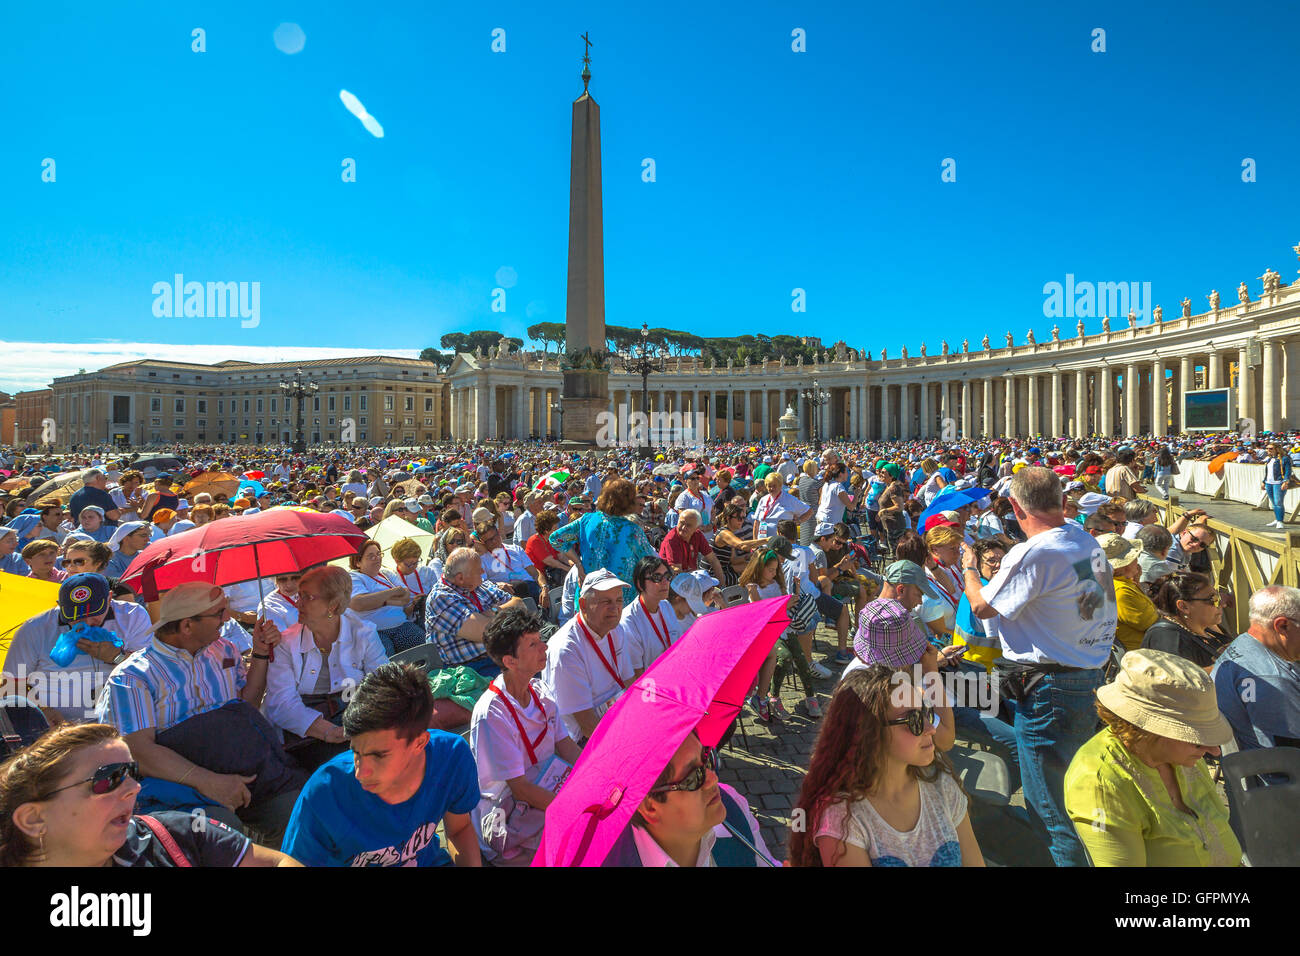 People in Piazza San Pietro Stock Photo